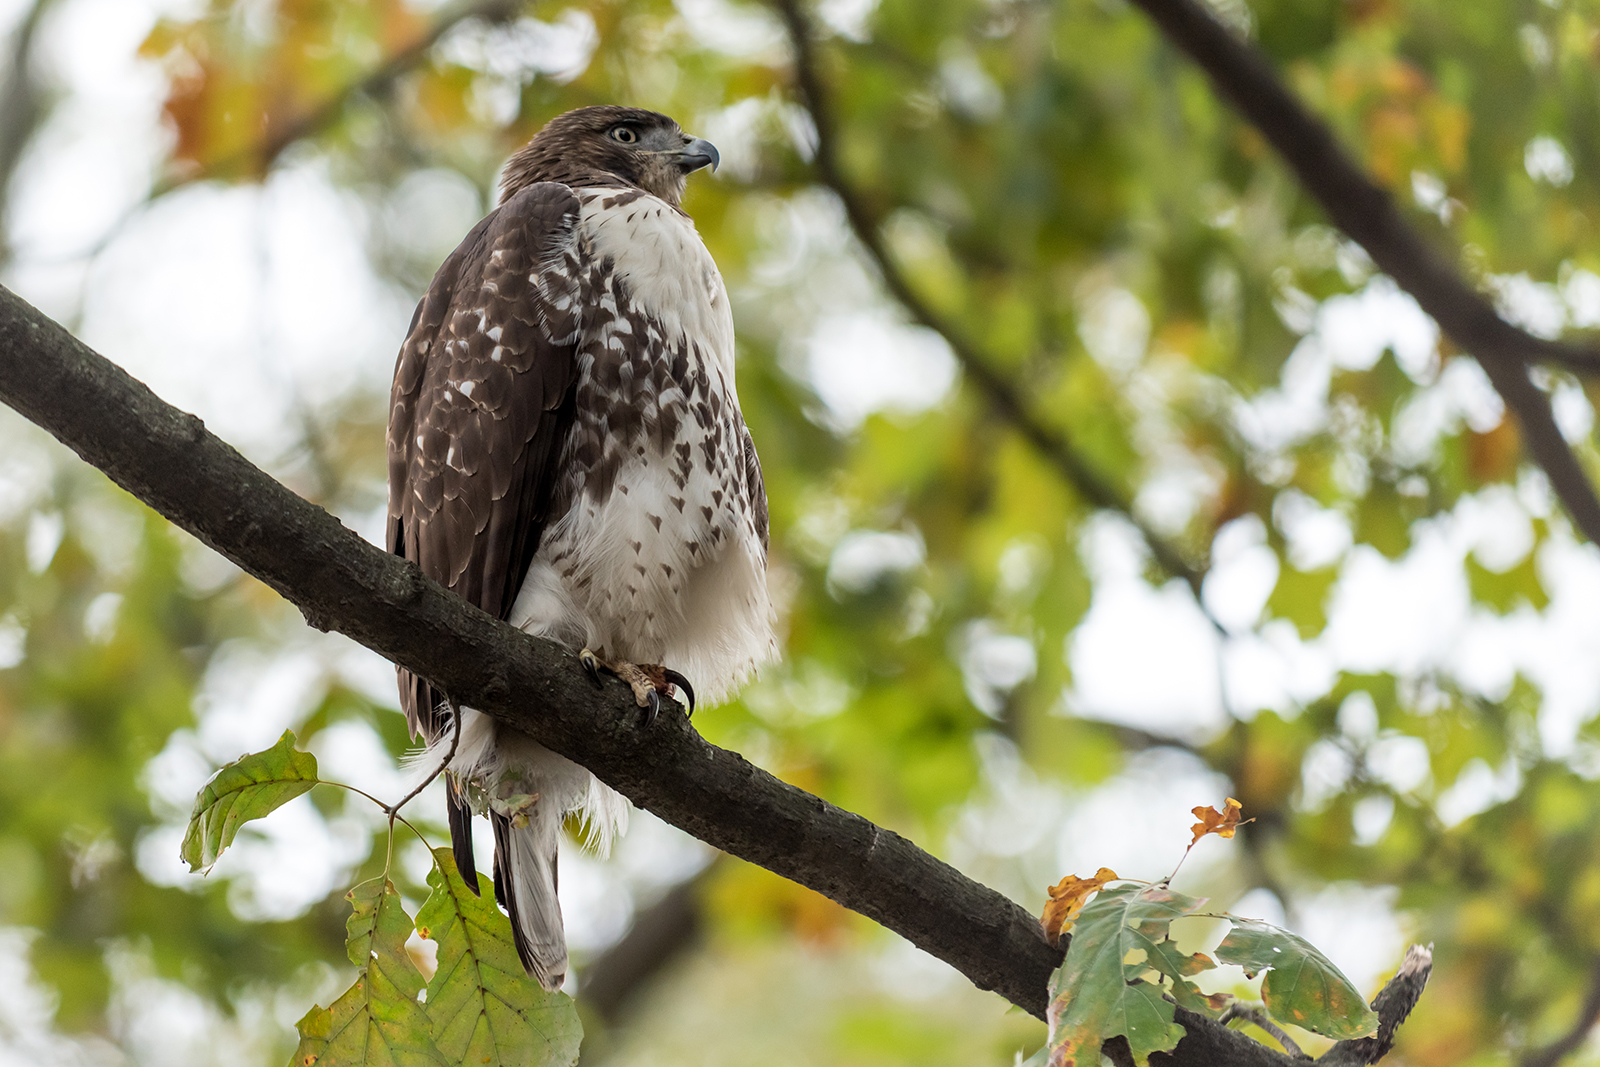 A hawk near the Andrew Carnegie Building